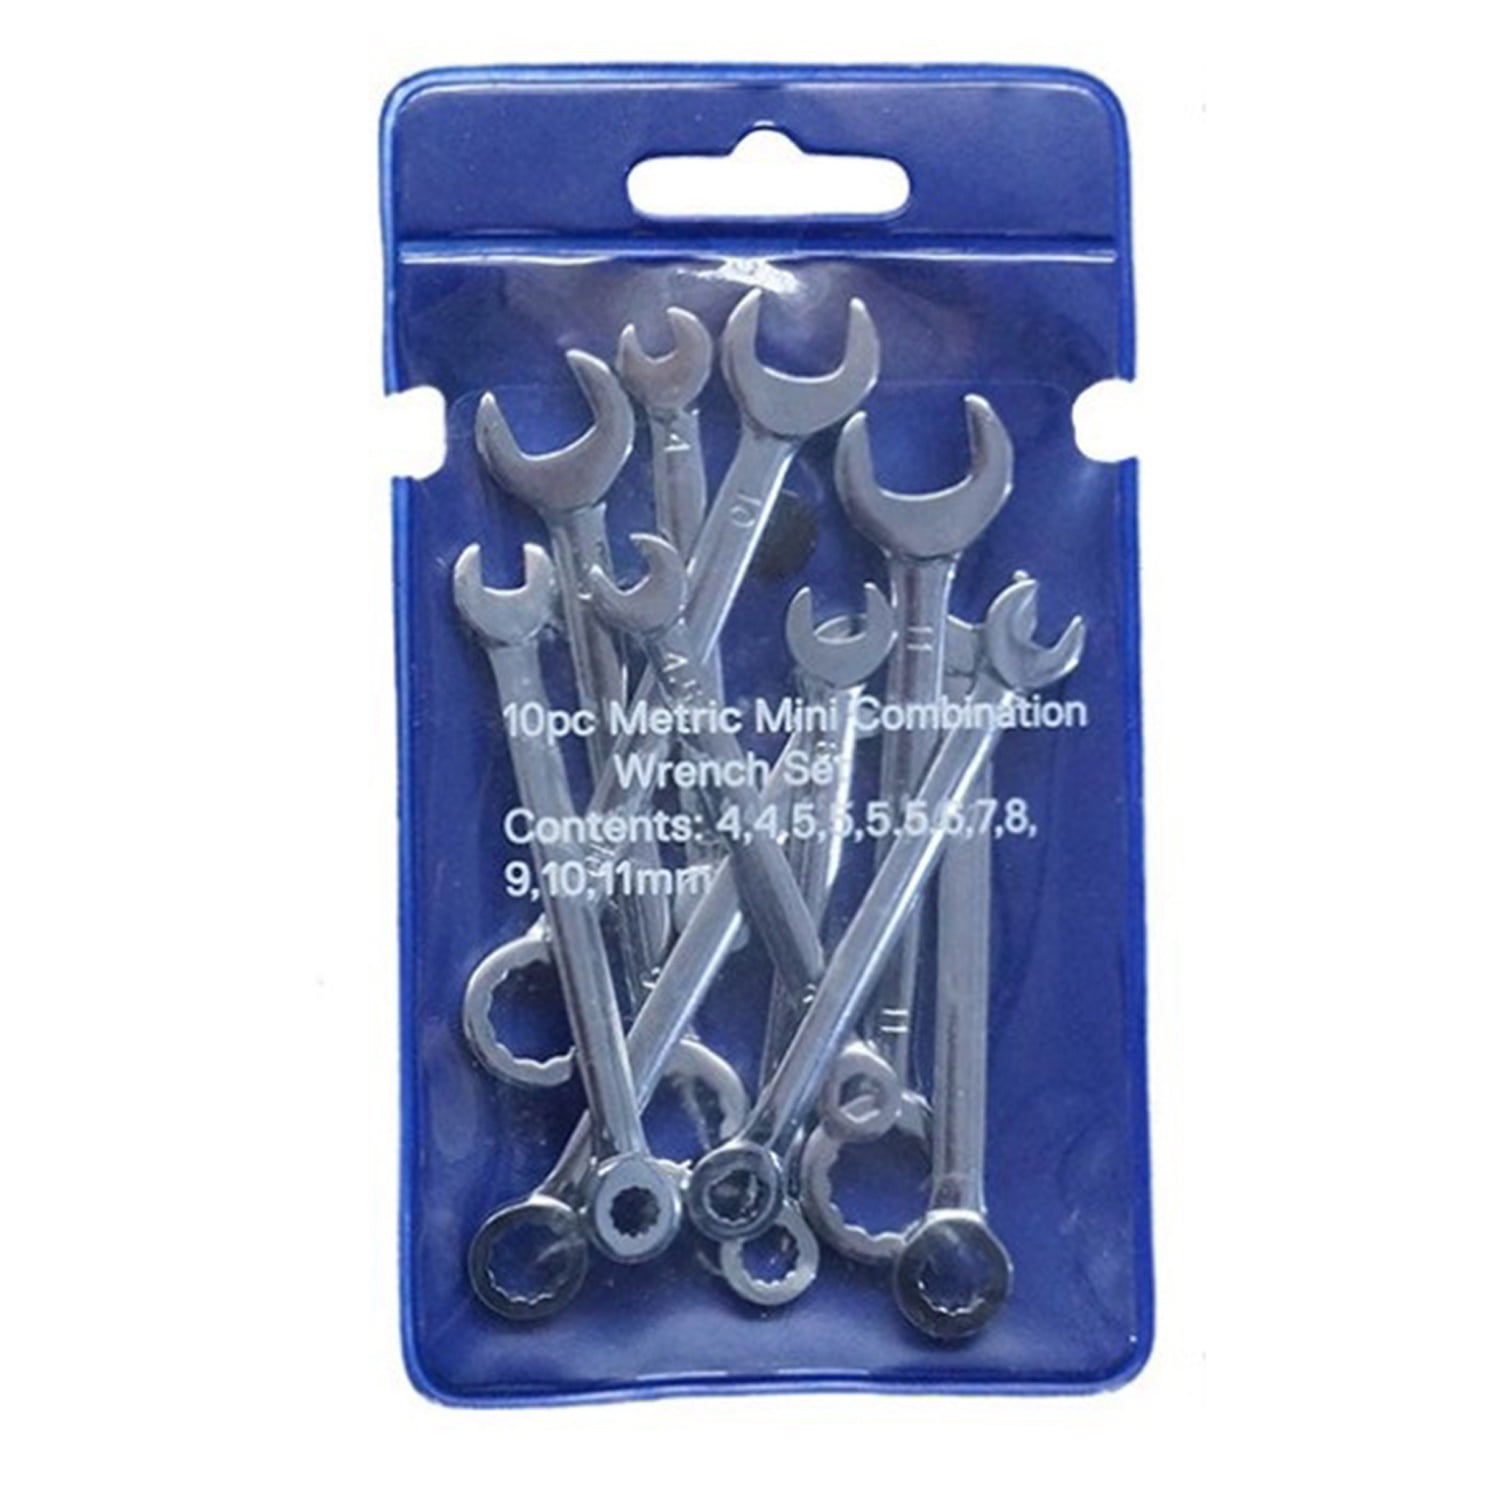 10Pcs Mini Combination Small Engineer Wrench Set Key Ring Set Tools Spanner 4-11mm Metric 